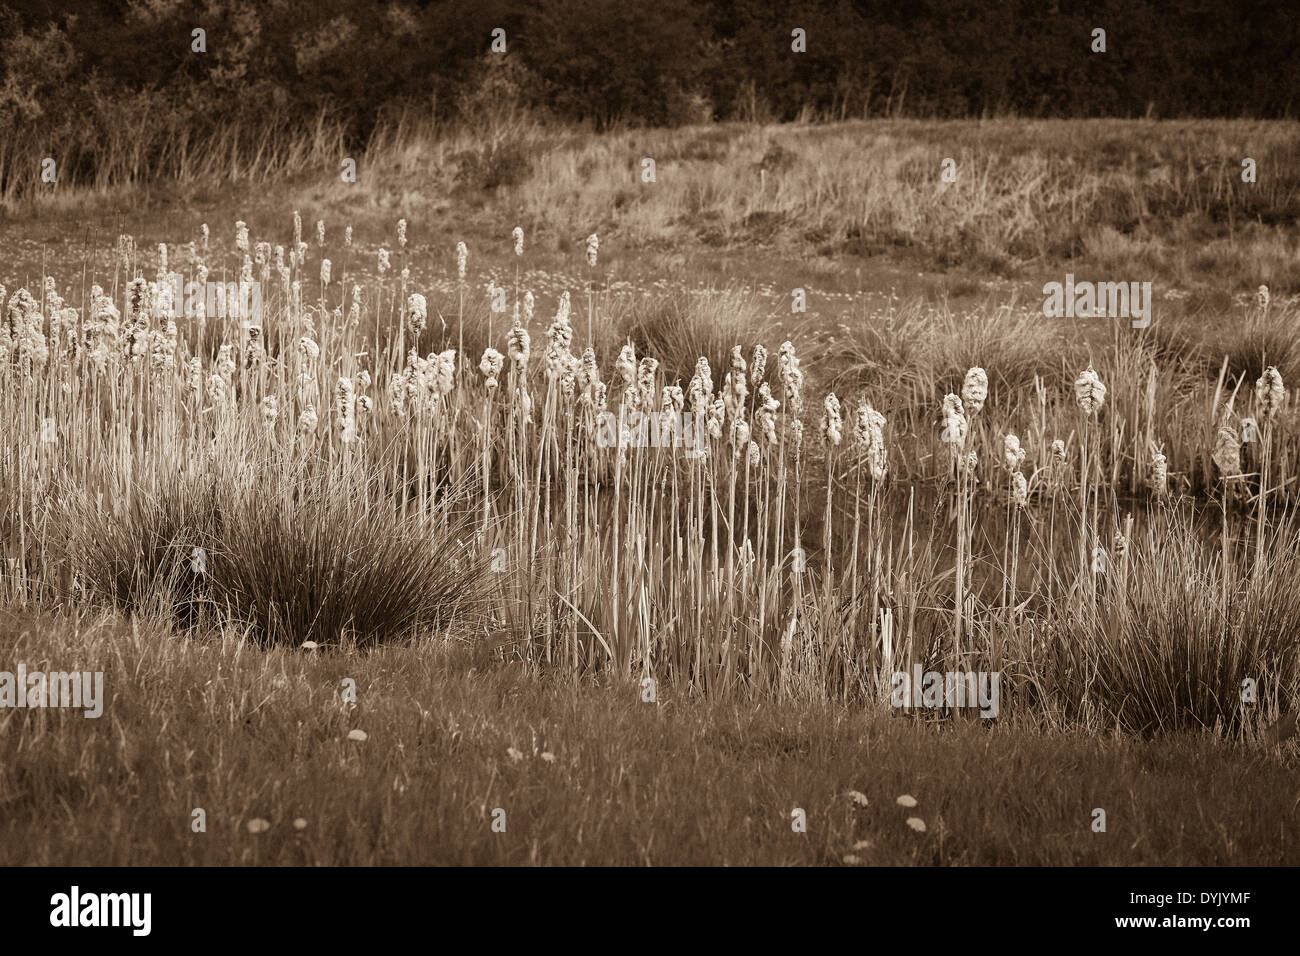 Bulrushes reedmace typha typhaceae fluffy cattail cobs fluffy seed heads bordering lake in spring Stock Photo